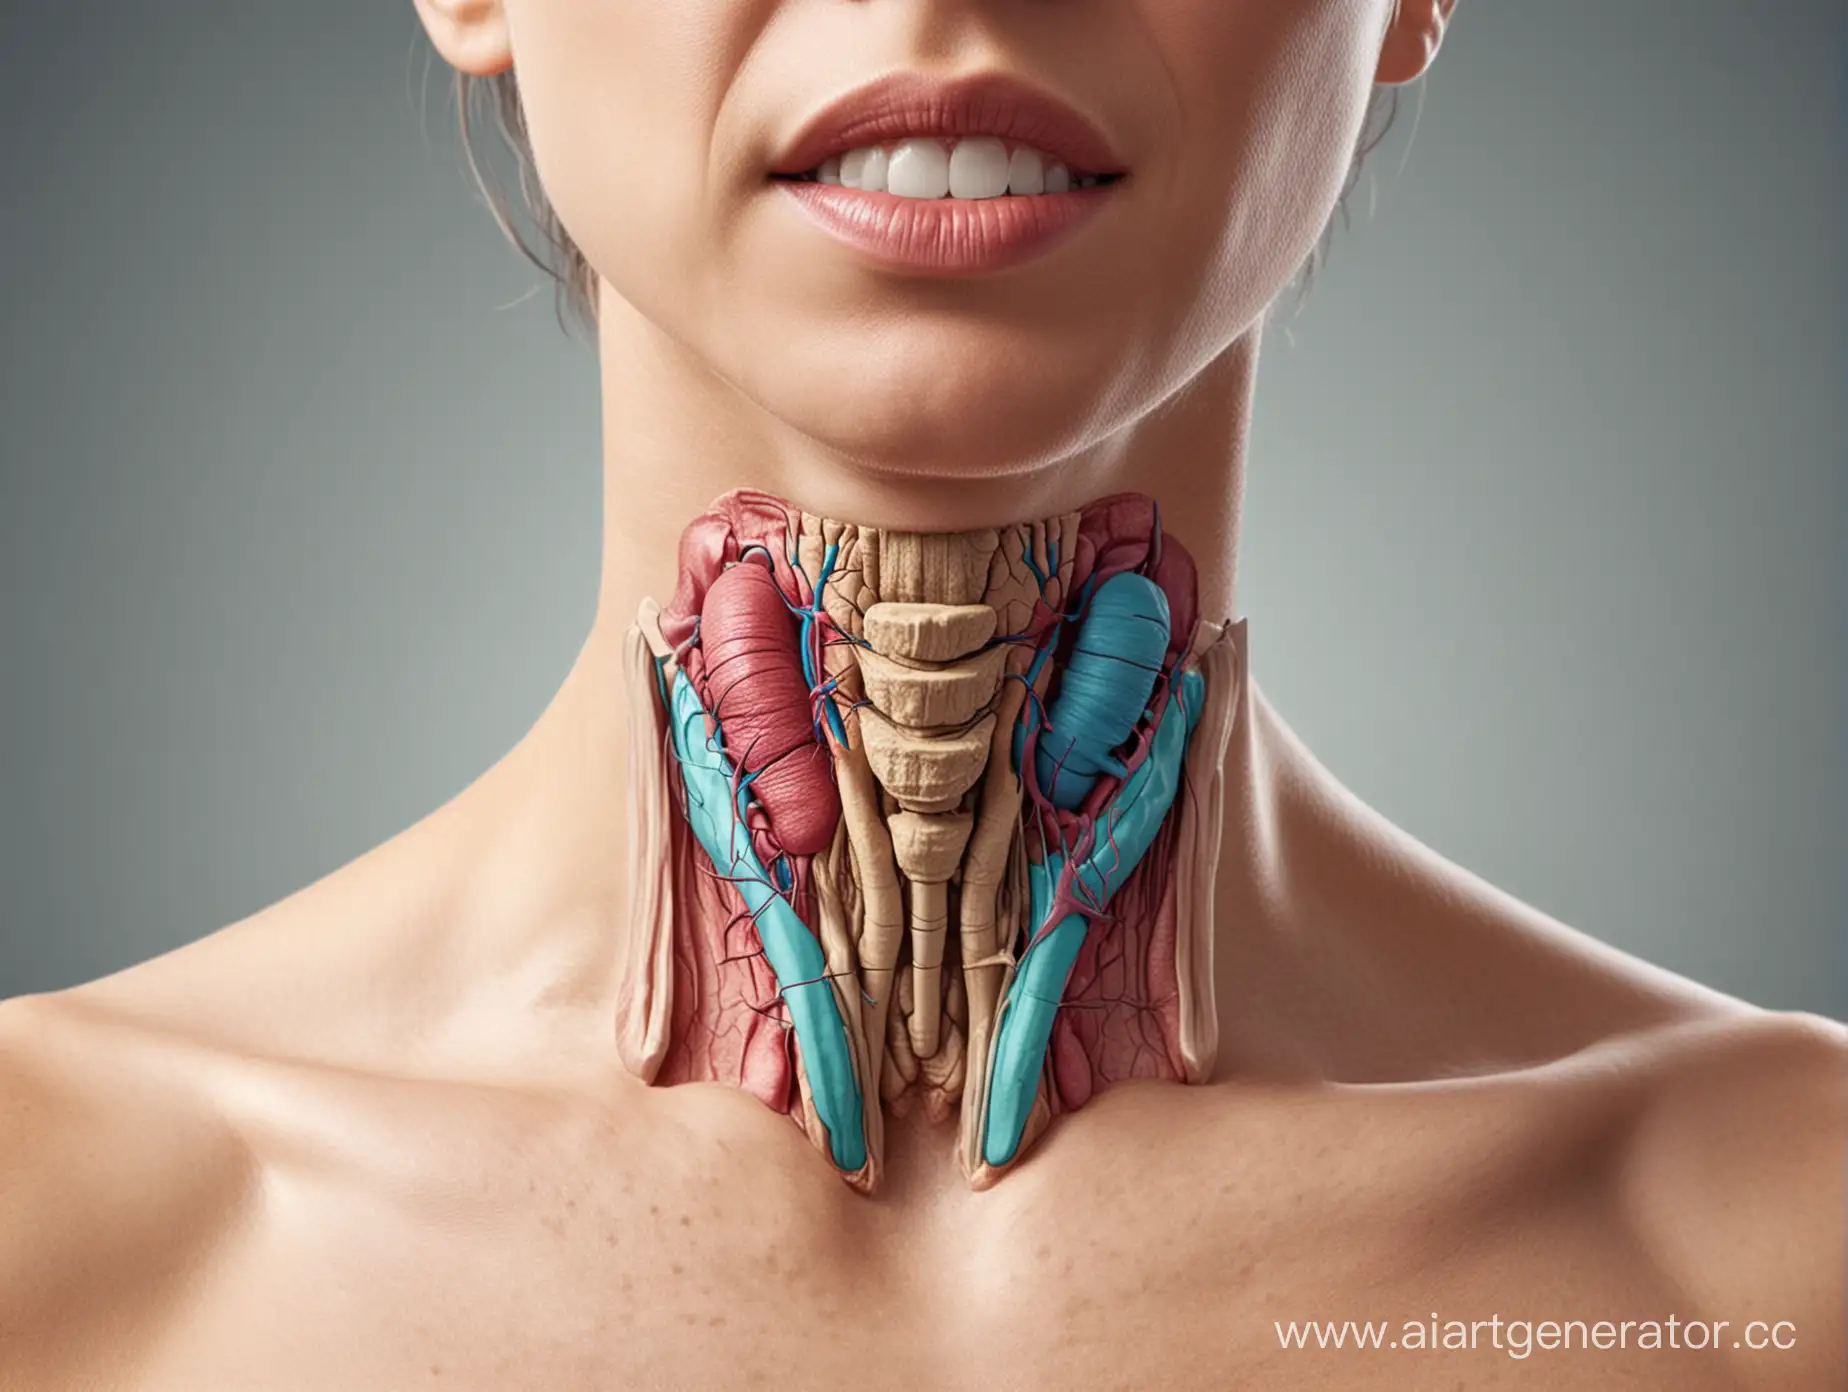 Anatomy-of-the-Thyroid-Gland-in-Humans-Detailed-Illustration